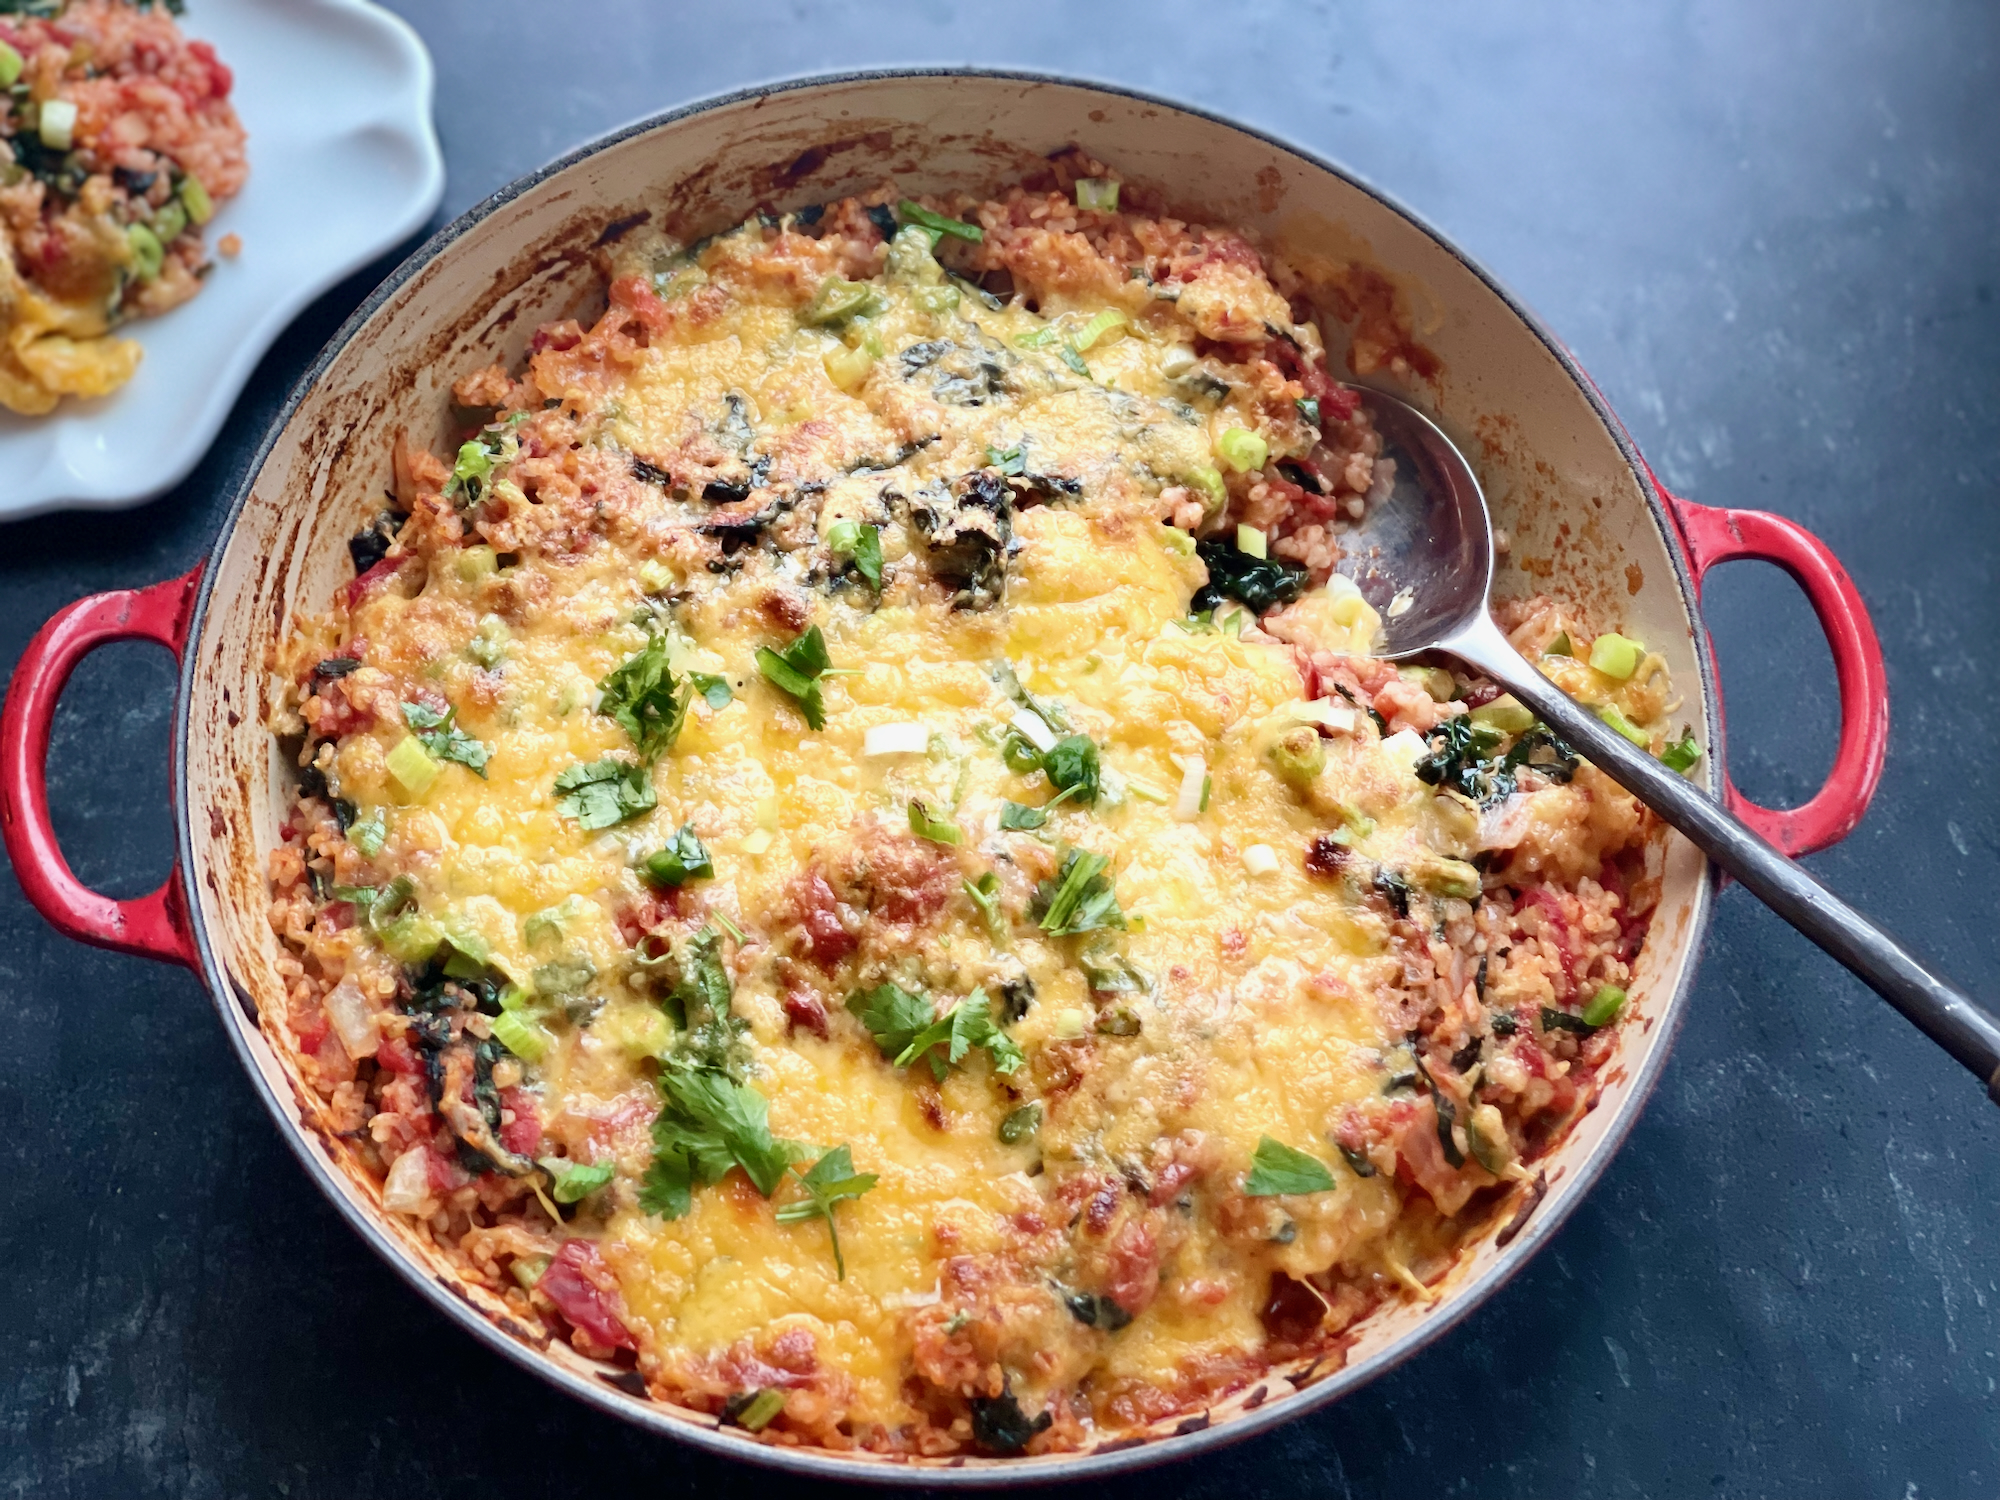 Featured image for “Kale Tomato Rice with Broiled Cheese”